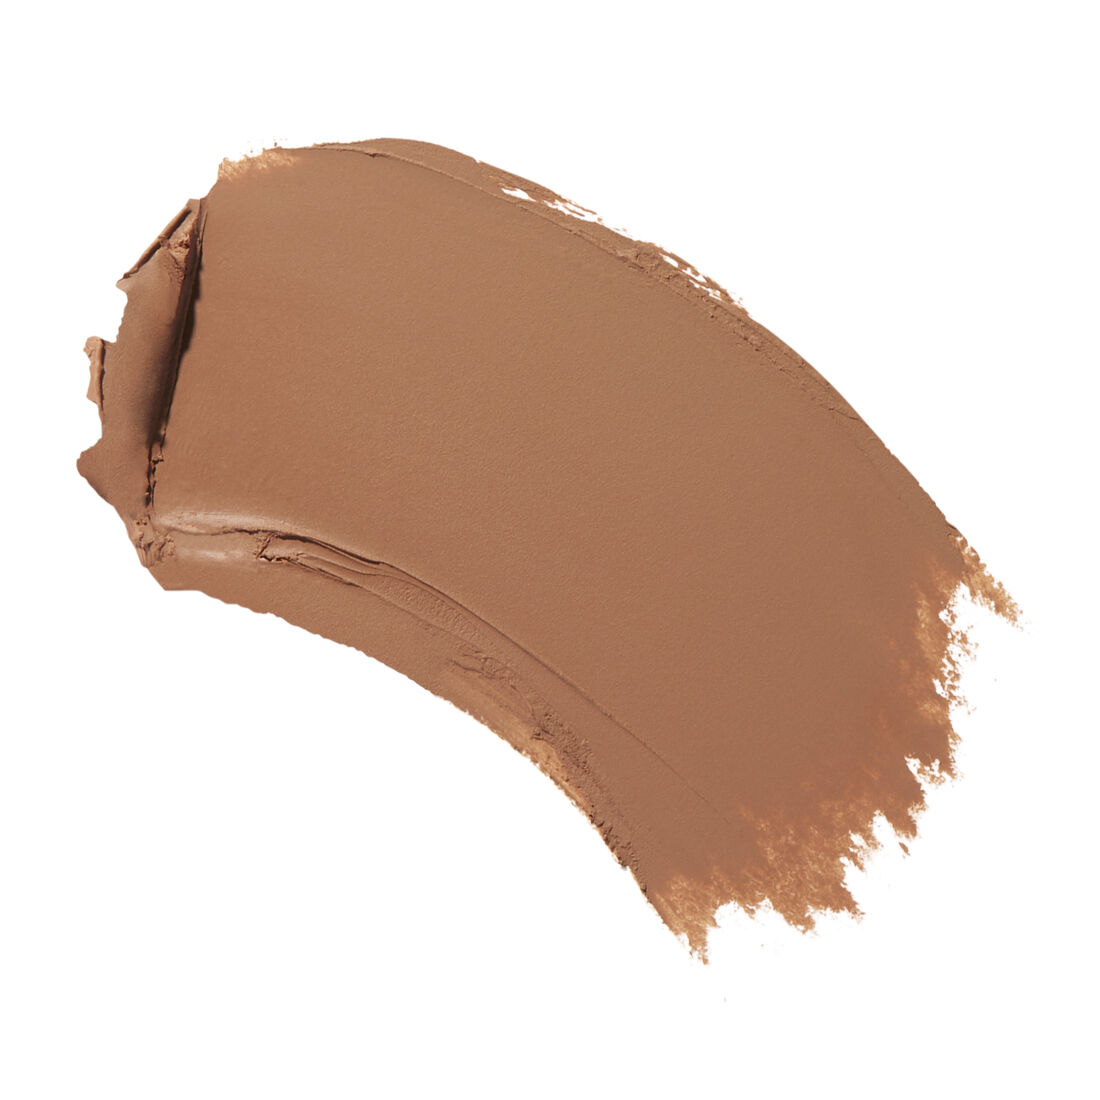 PUTTY EYE PRIMER NudeFace Chile